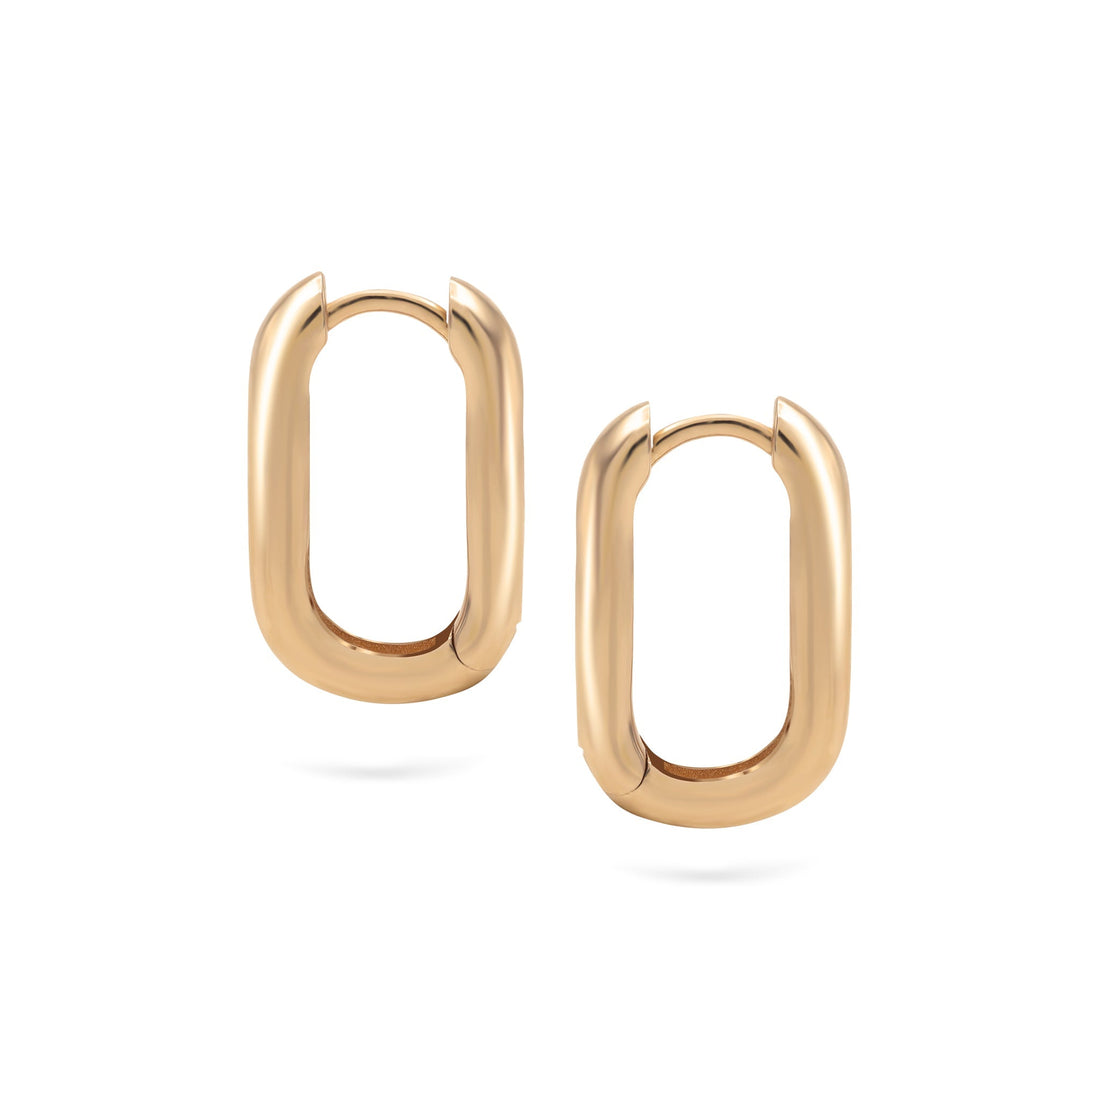 Jewelry Curved Goldens Hoops | Large Gold Earrings | 14K - Rose / Pair - earrings Zengoda Shop online from